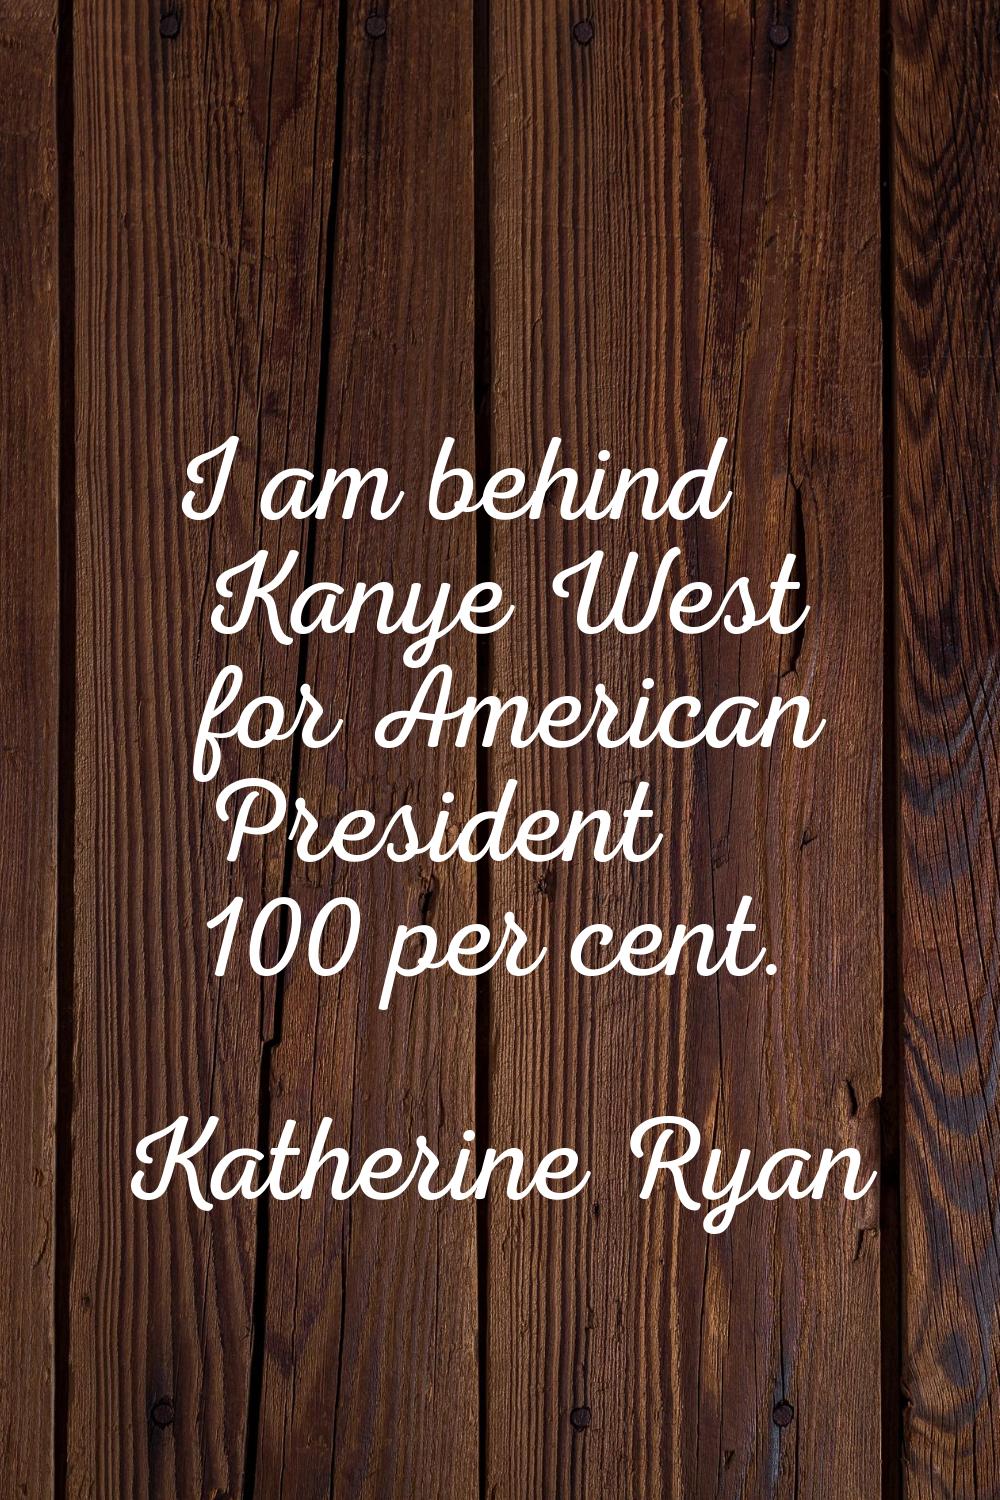 I am behind Kanye West for American President 100 per cent.